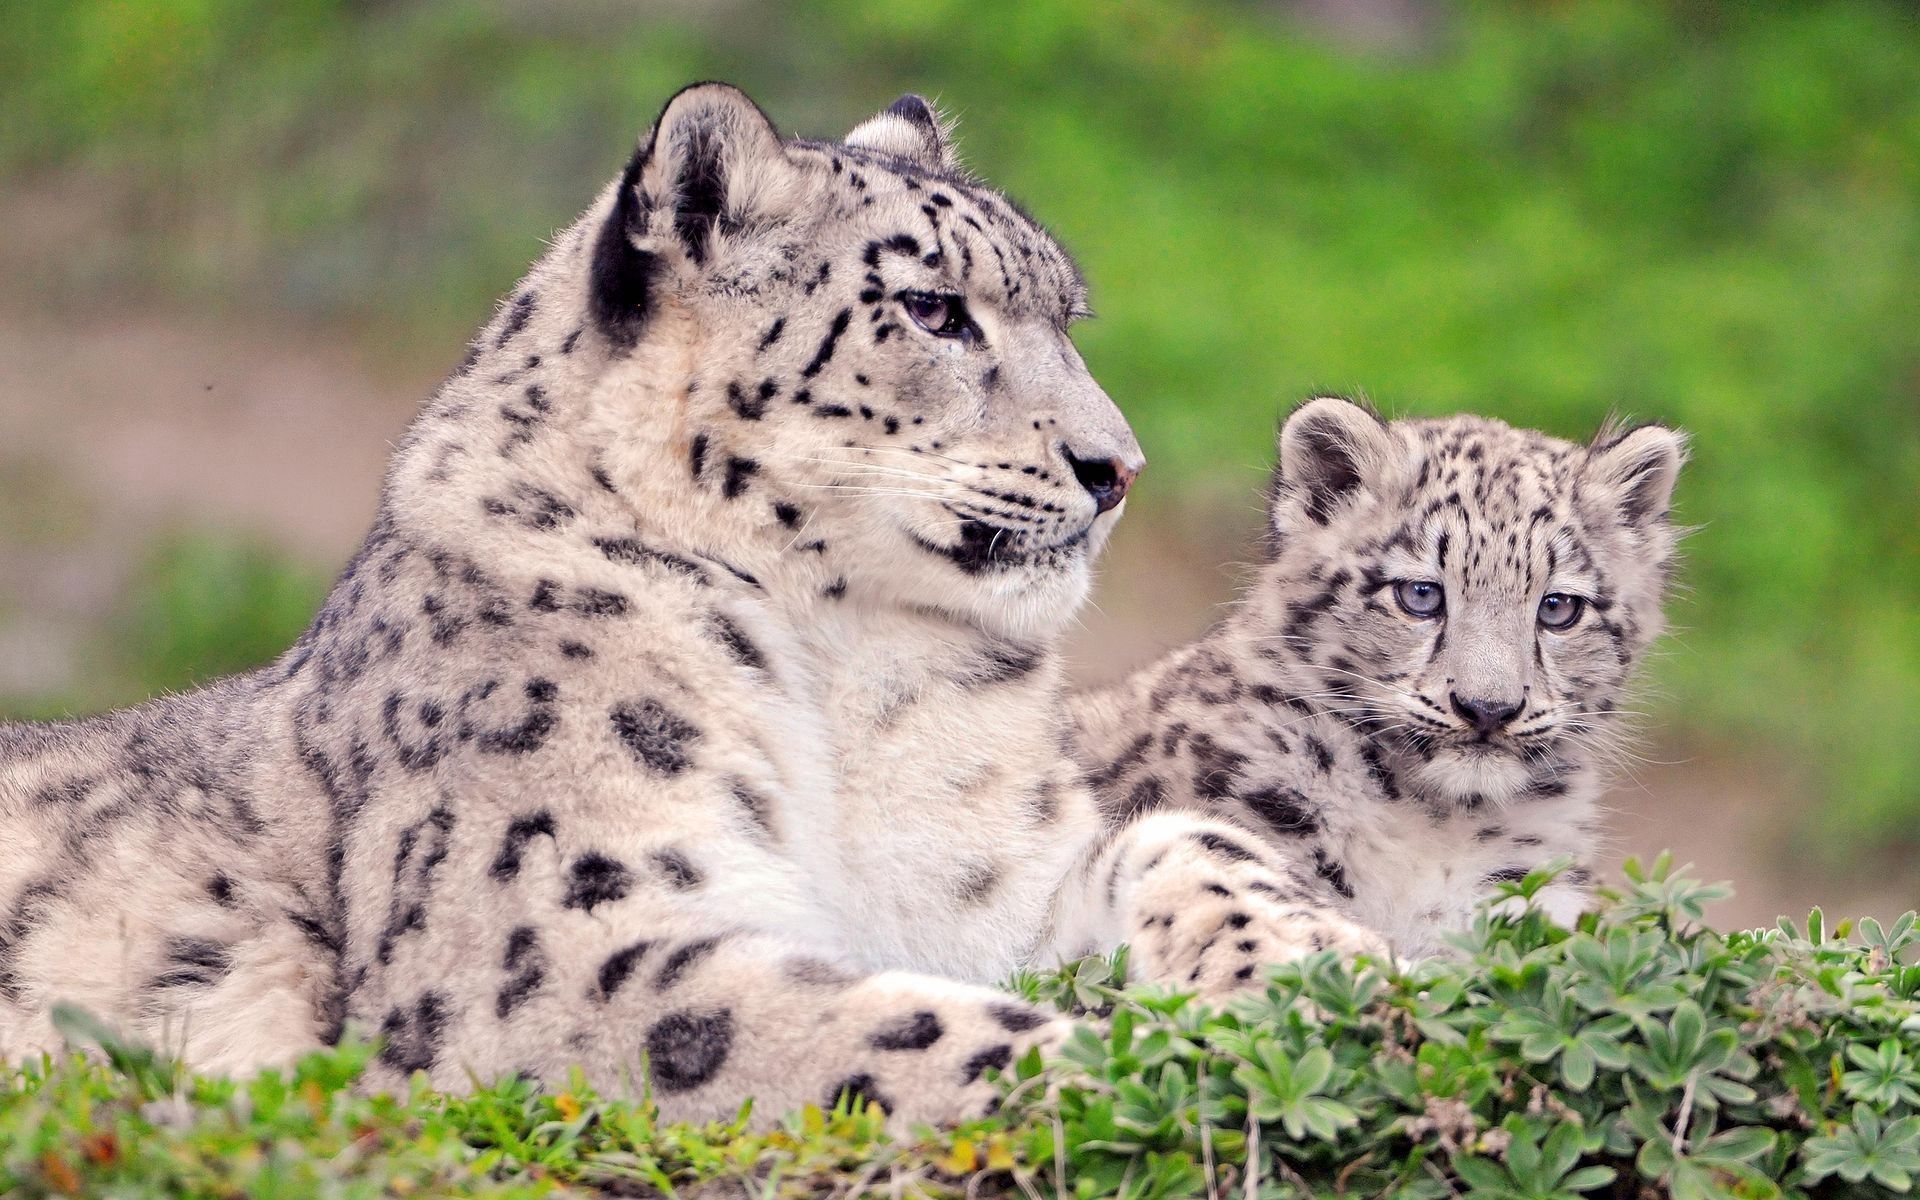 couple, animals, grass, snow leopard, sit, young, pair, joey